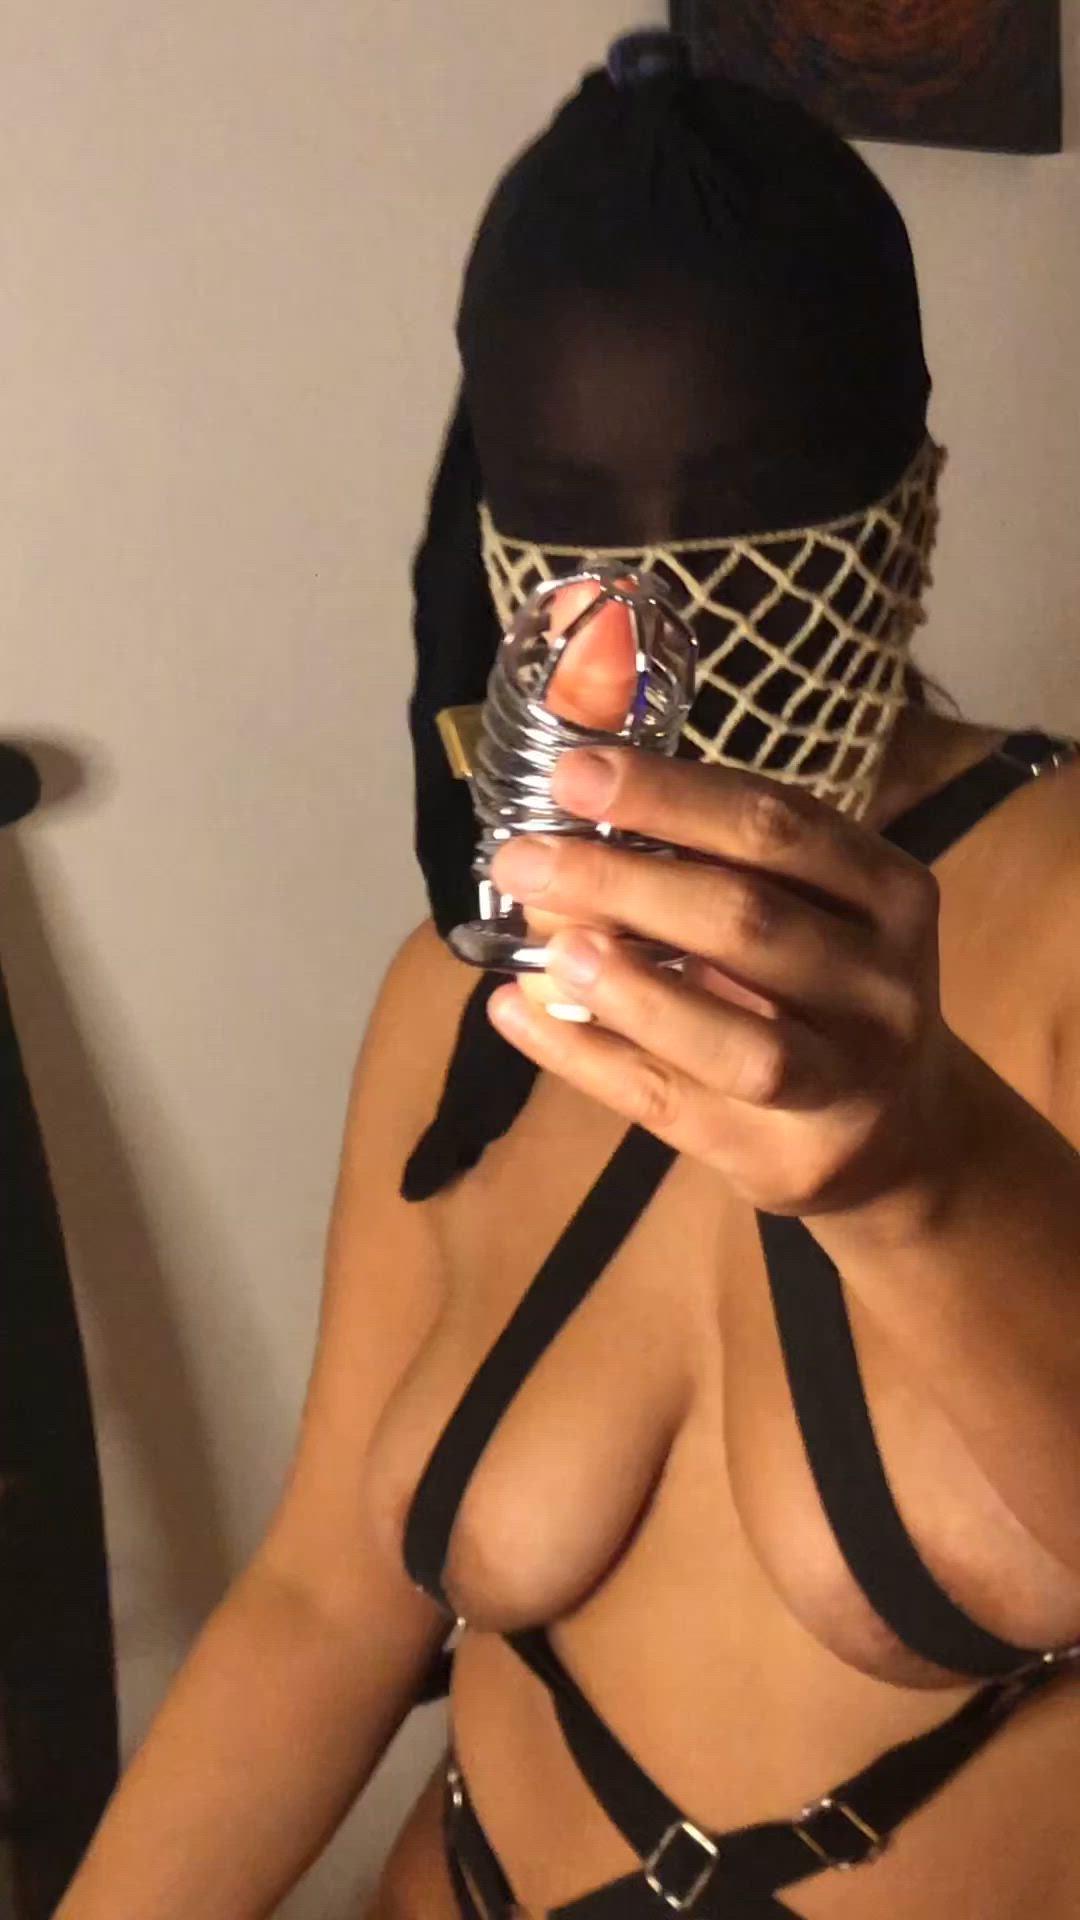 R/sph porn video with onlyfans model dominatrixxx07 <strong>@waterfall-latina</strong>